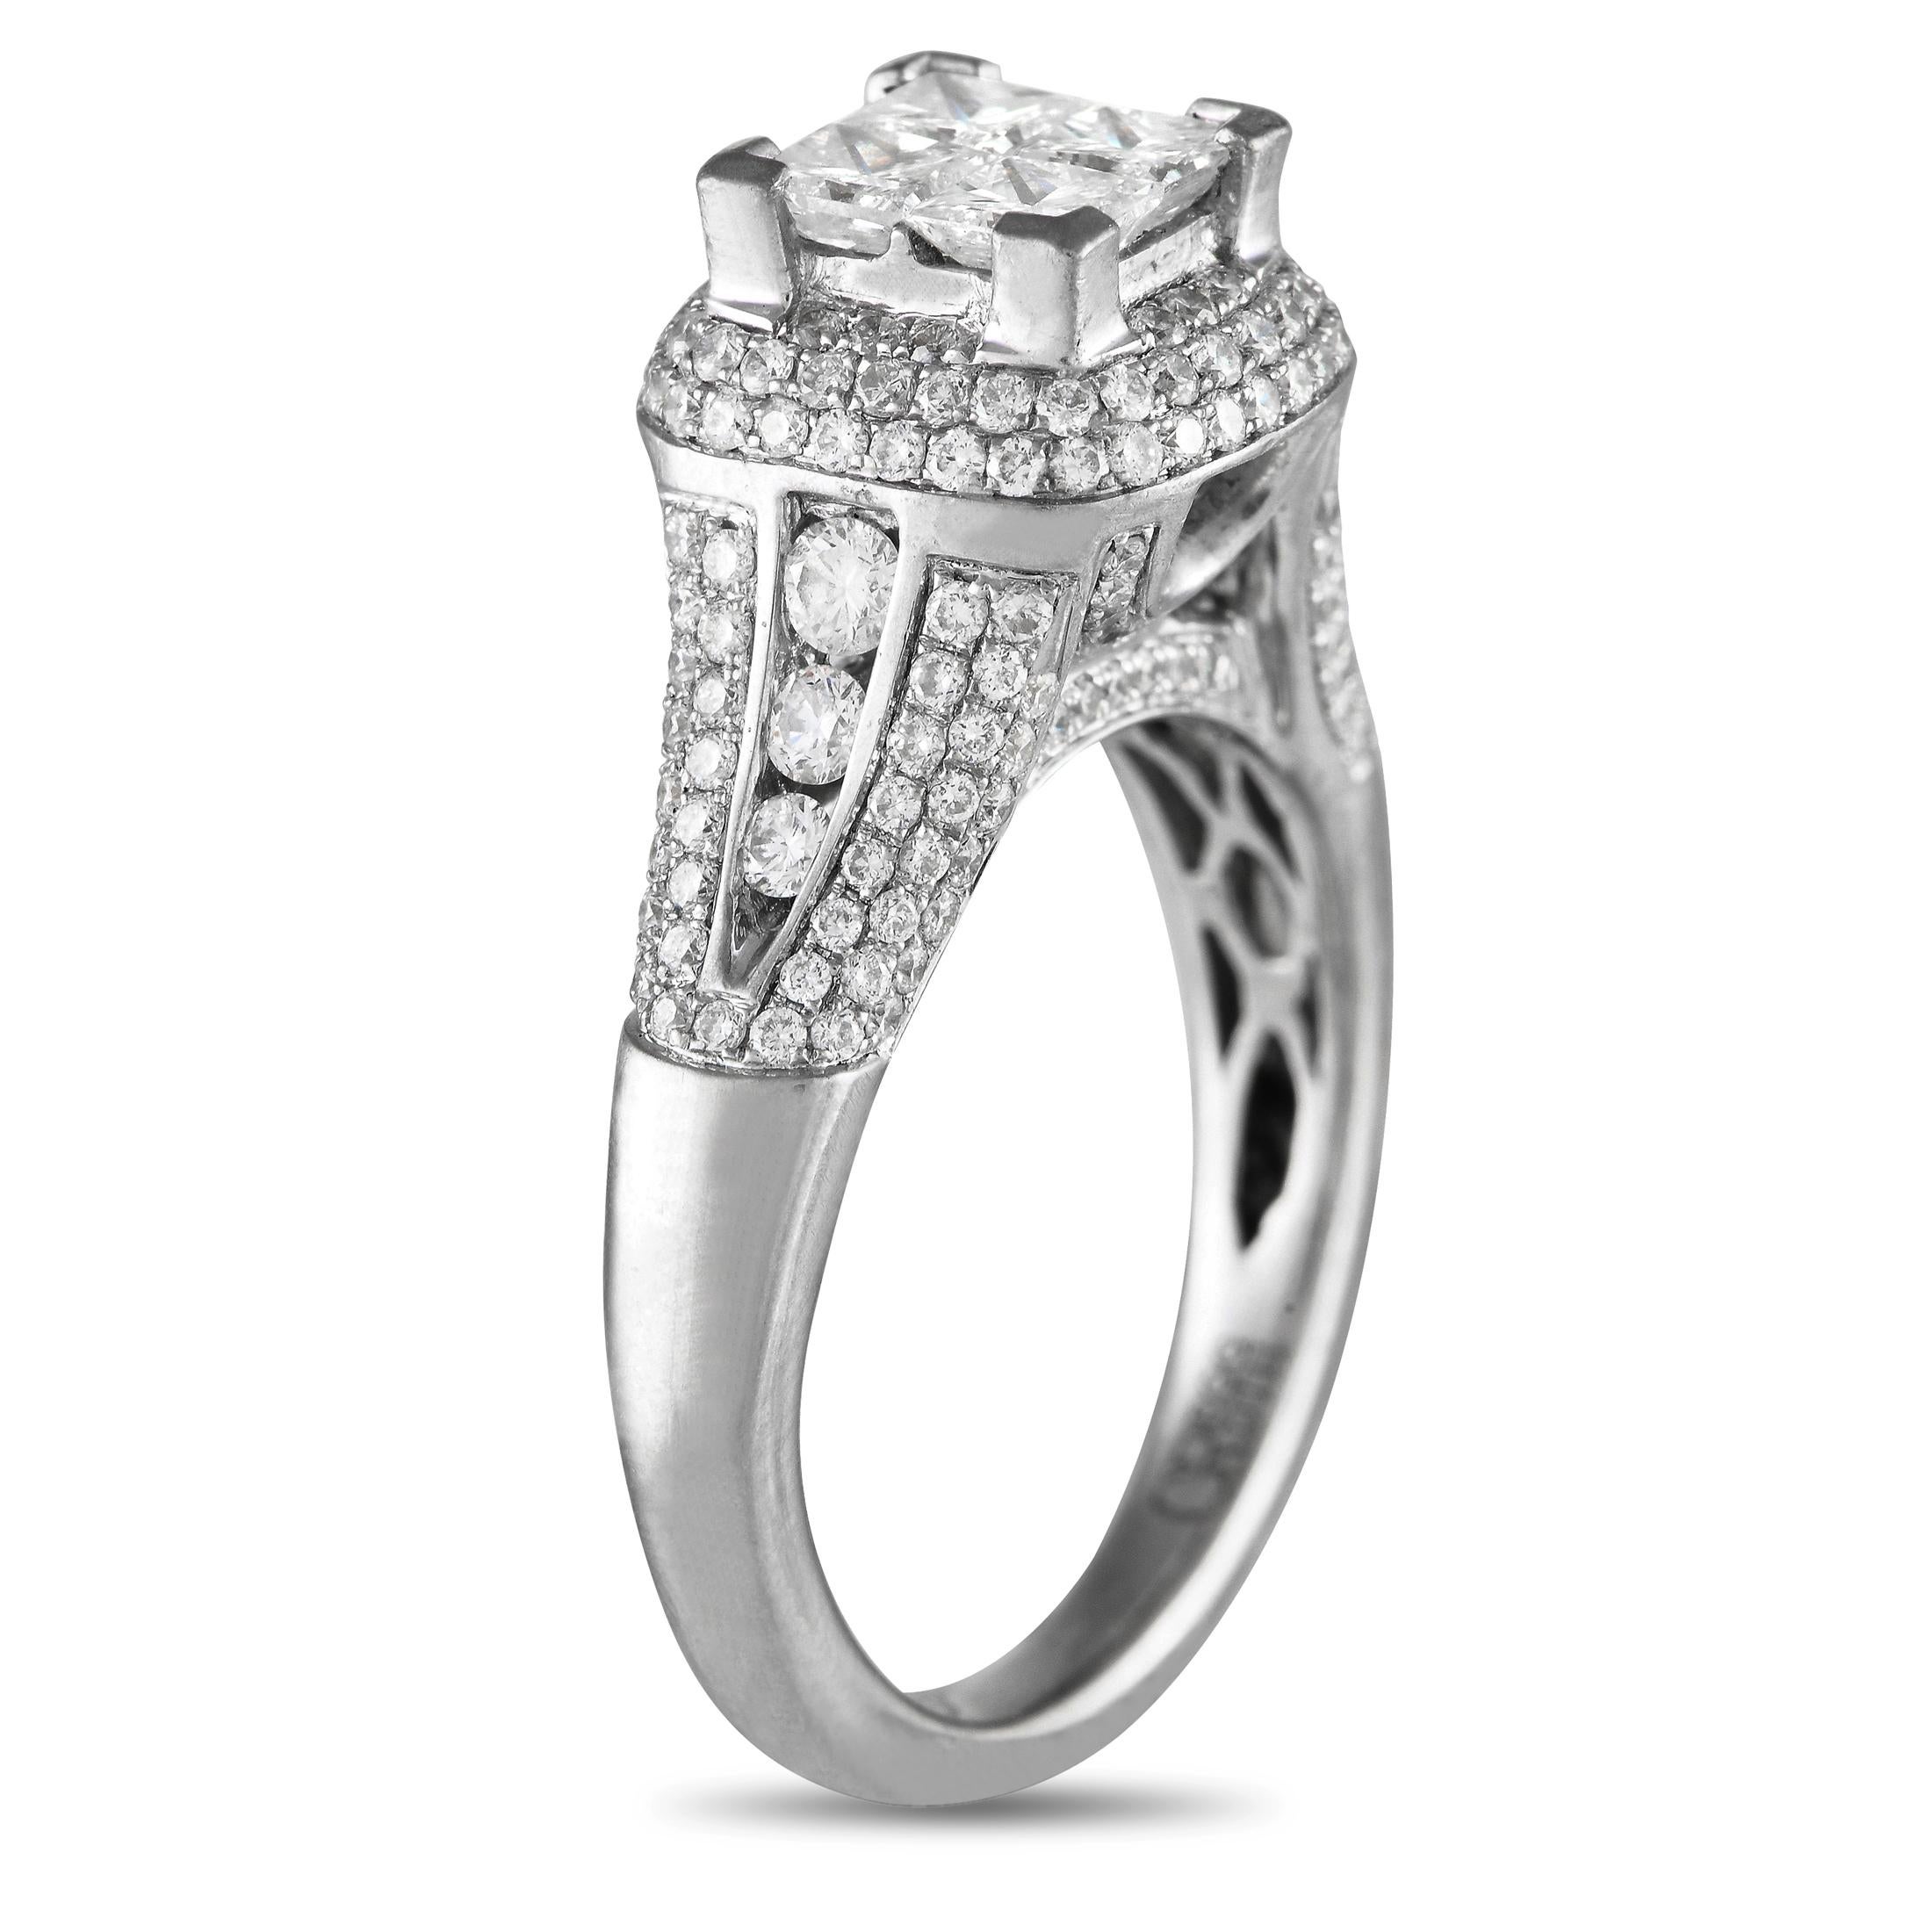 A dazzling arrangement of Diamonds with a total weight of 1.85 carats make this ring impossible to ignore. This pieces stunning 18K White Gold setting features a 1mm wide band and a bold 10mm top height.This jewelry piece is offered in estate